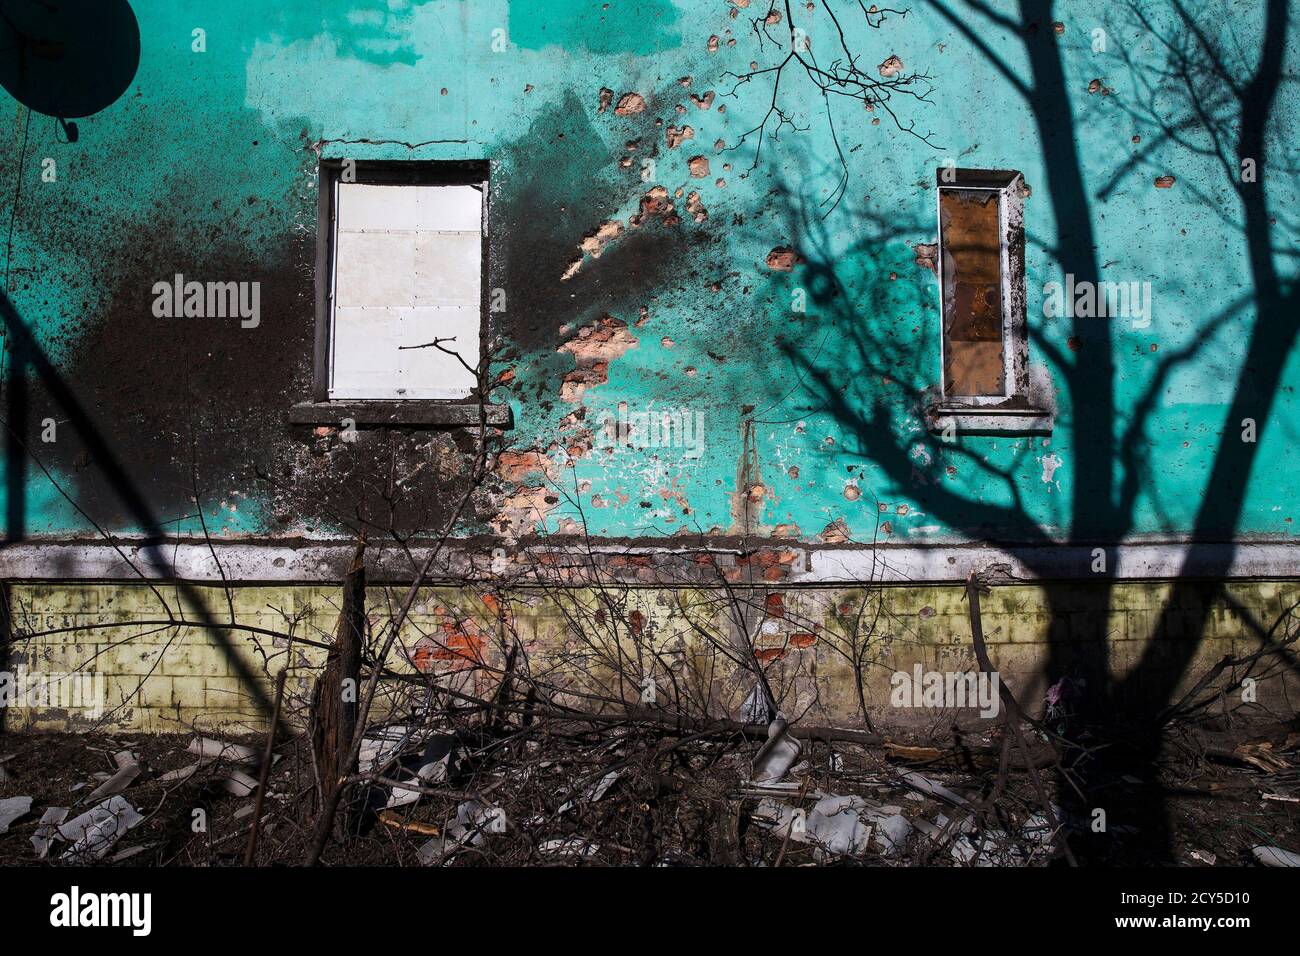 A house damaged by fighting is seen in the town of Vuhlehirsk February 25, 2015. Picture taken February 25, 2015. REUTERS/Baz Ratner (UKRAINE - Tags: POLITICS CIVIL UNREST CONFLICT MILITARY SOCIETY)  ATTENTION EDITORS: PICTURE 17 OF 19 FOR WIDER IMAGE PACKAGE  'DEBALTSEVE - LIFE IN THE RUINS'  SEARCH 'RATNER RUINS' FOR ALL IMAGES Stock Photo